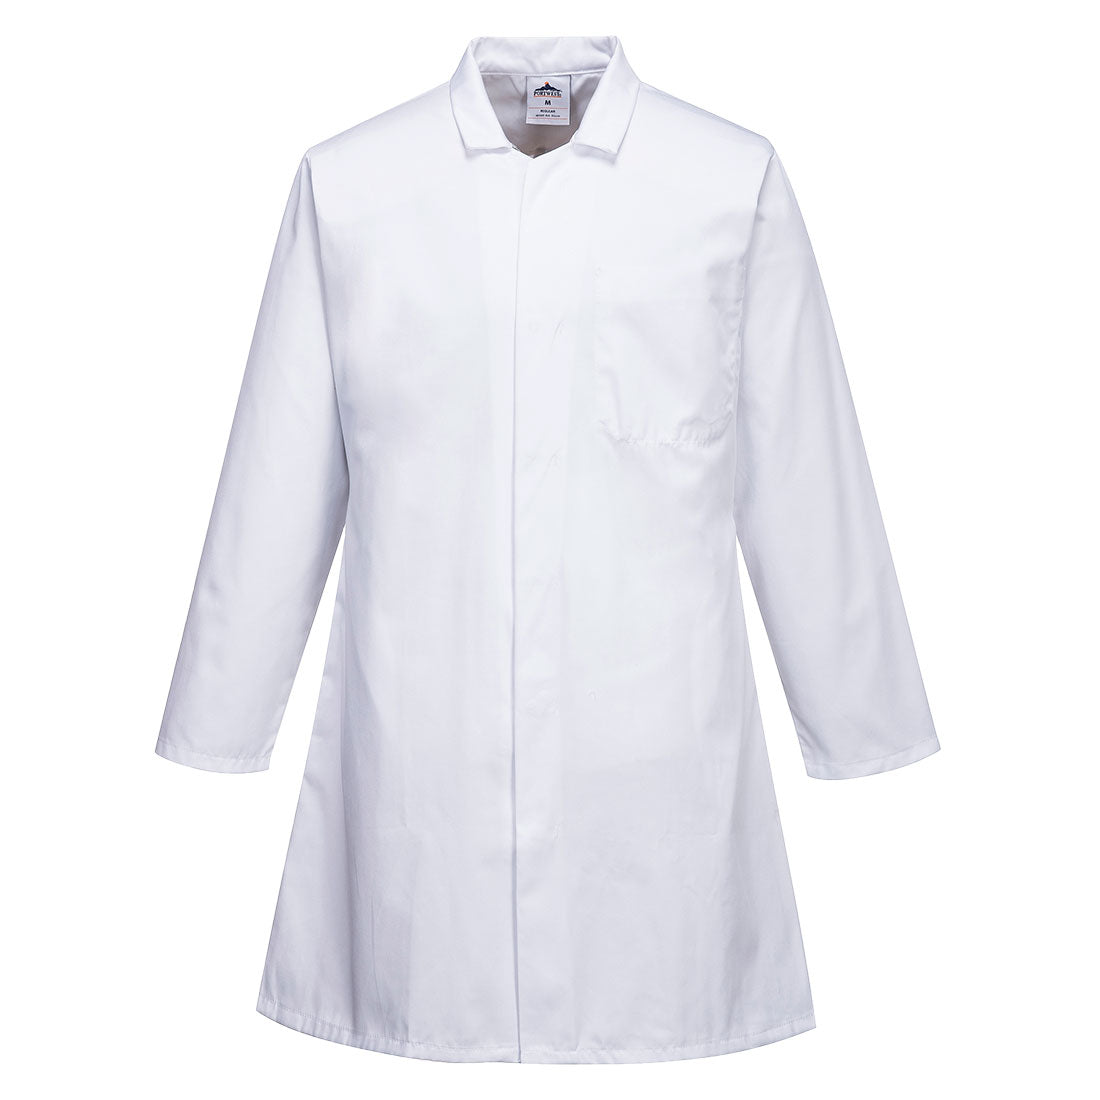 Portwest 2206 - White Mens Food Industry Coat, 3 Pockets Apron jacket ALL SIZES